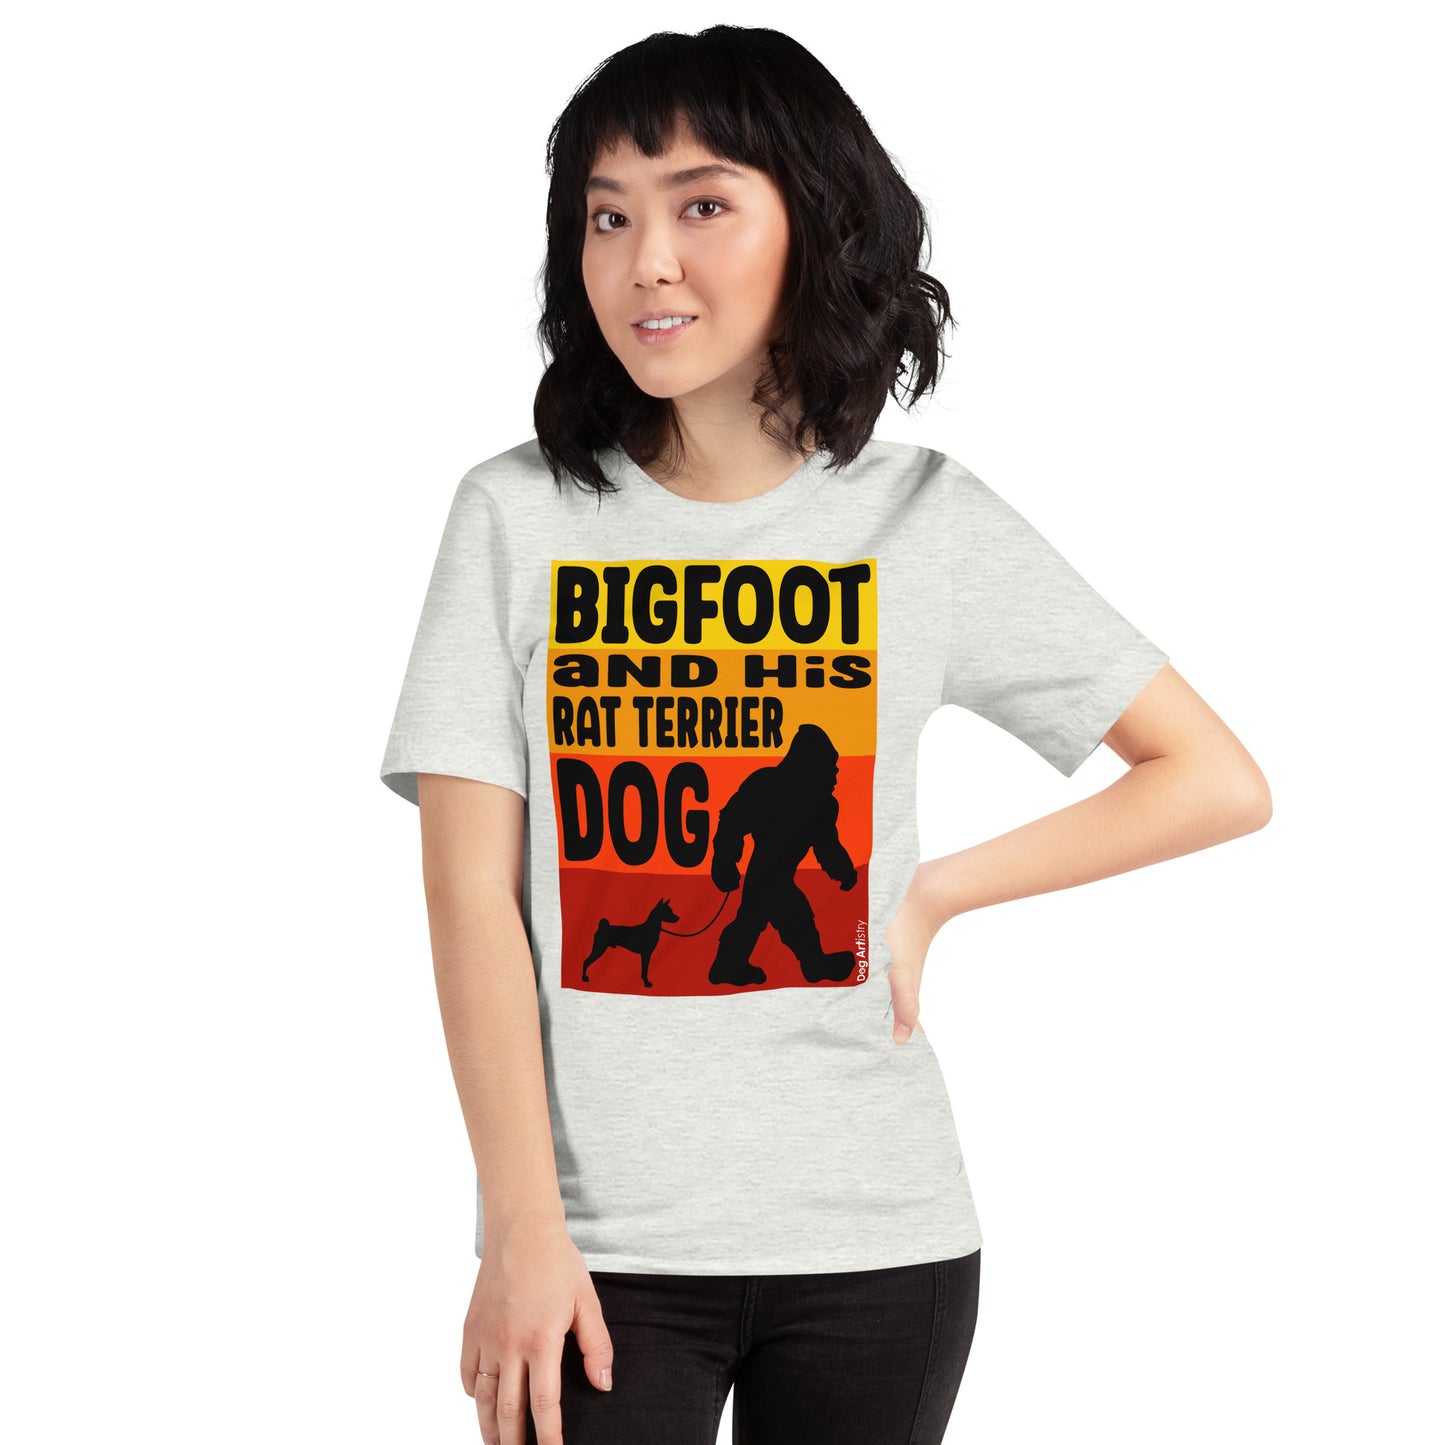 Bigfoot and his Rat Terrier unisex ash t-shirt by Dog Artistry.